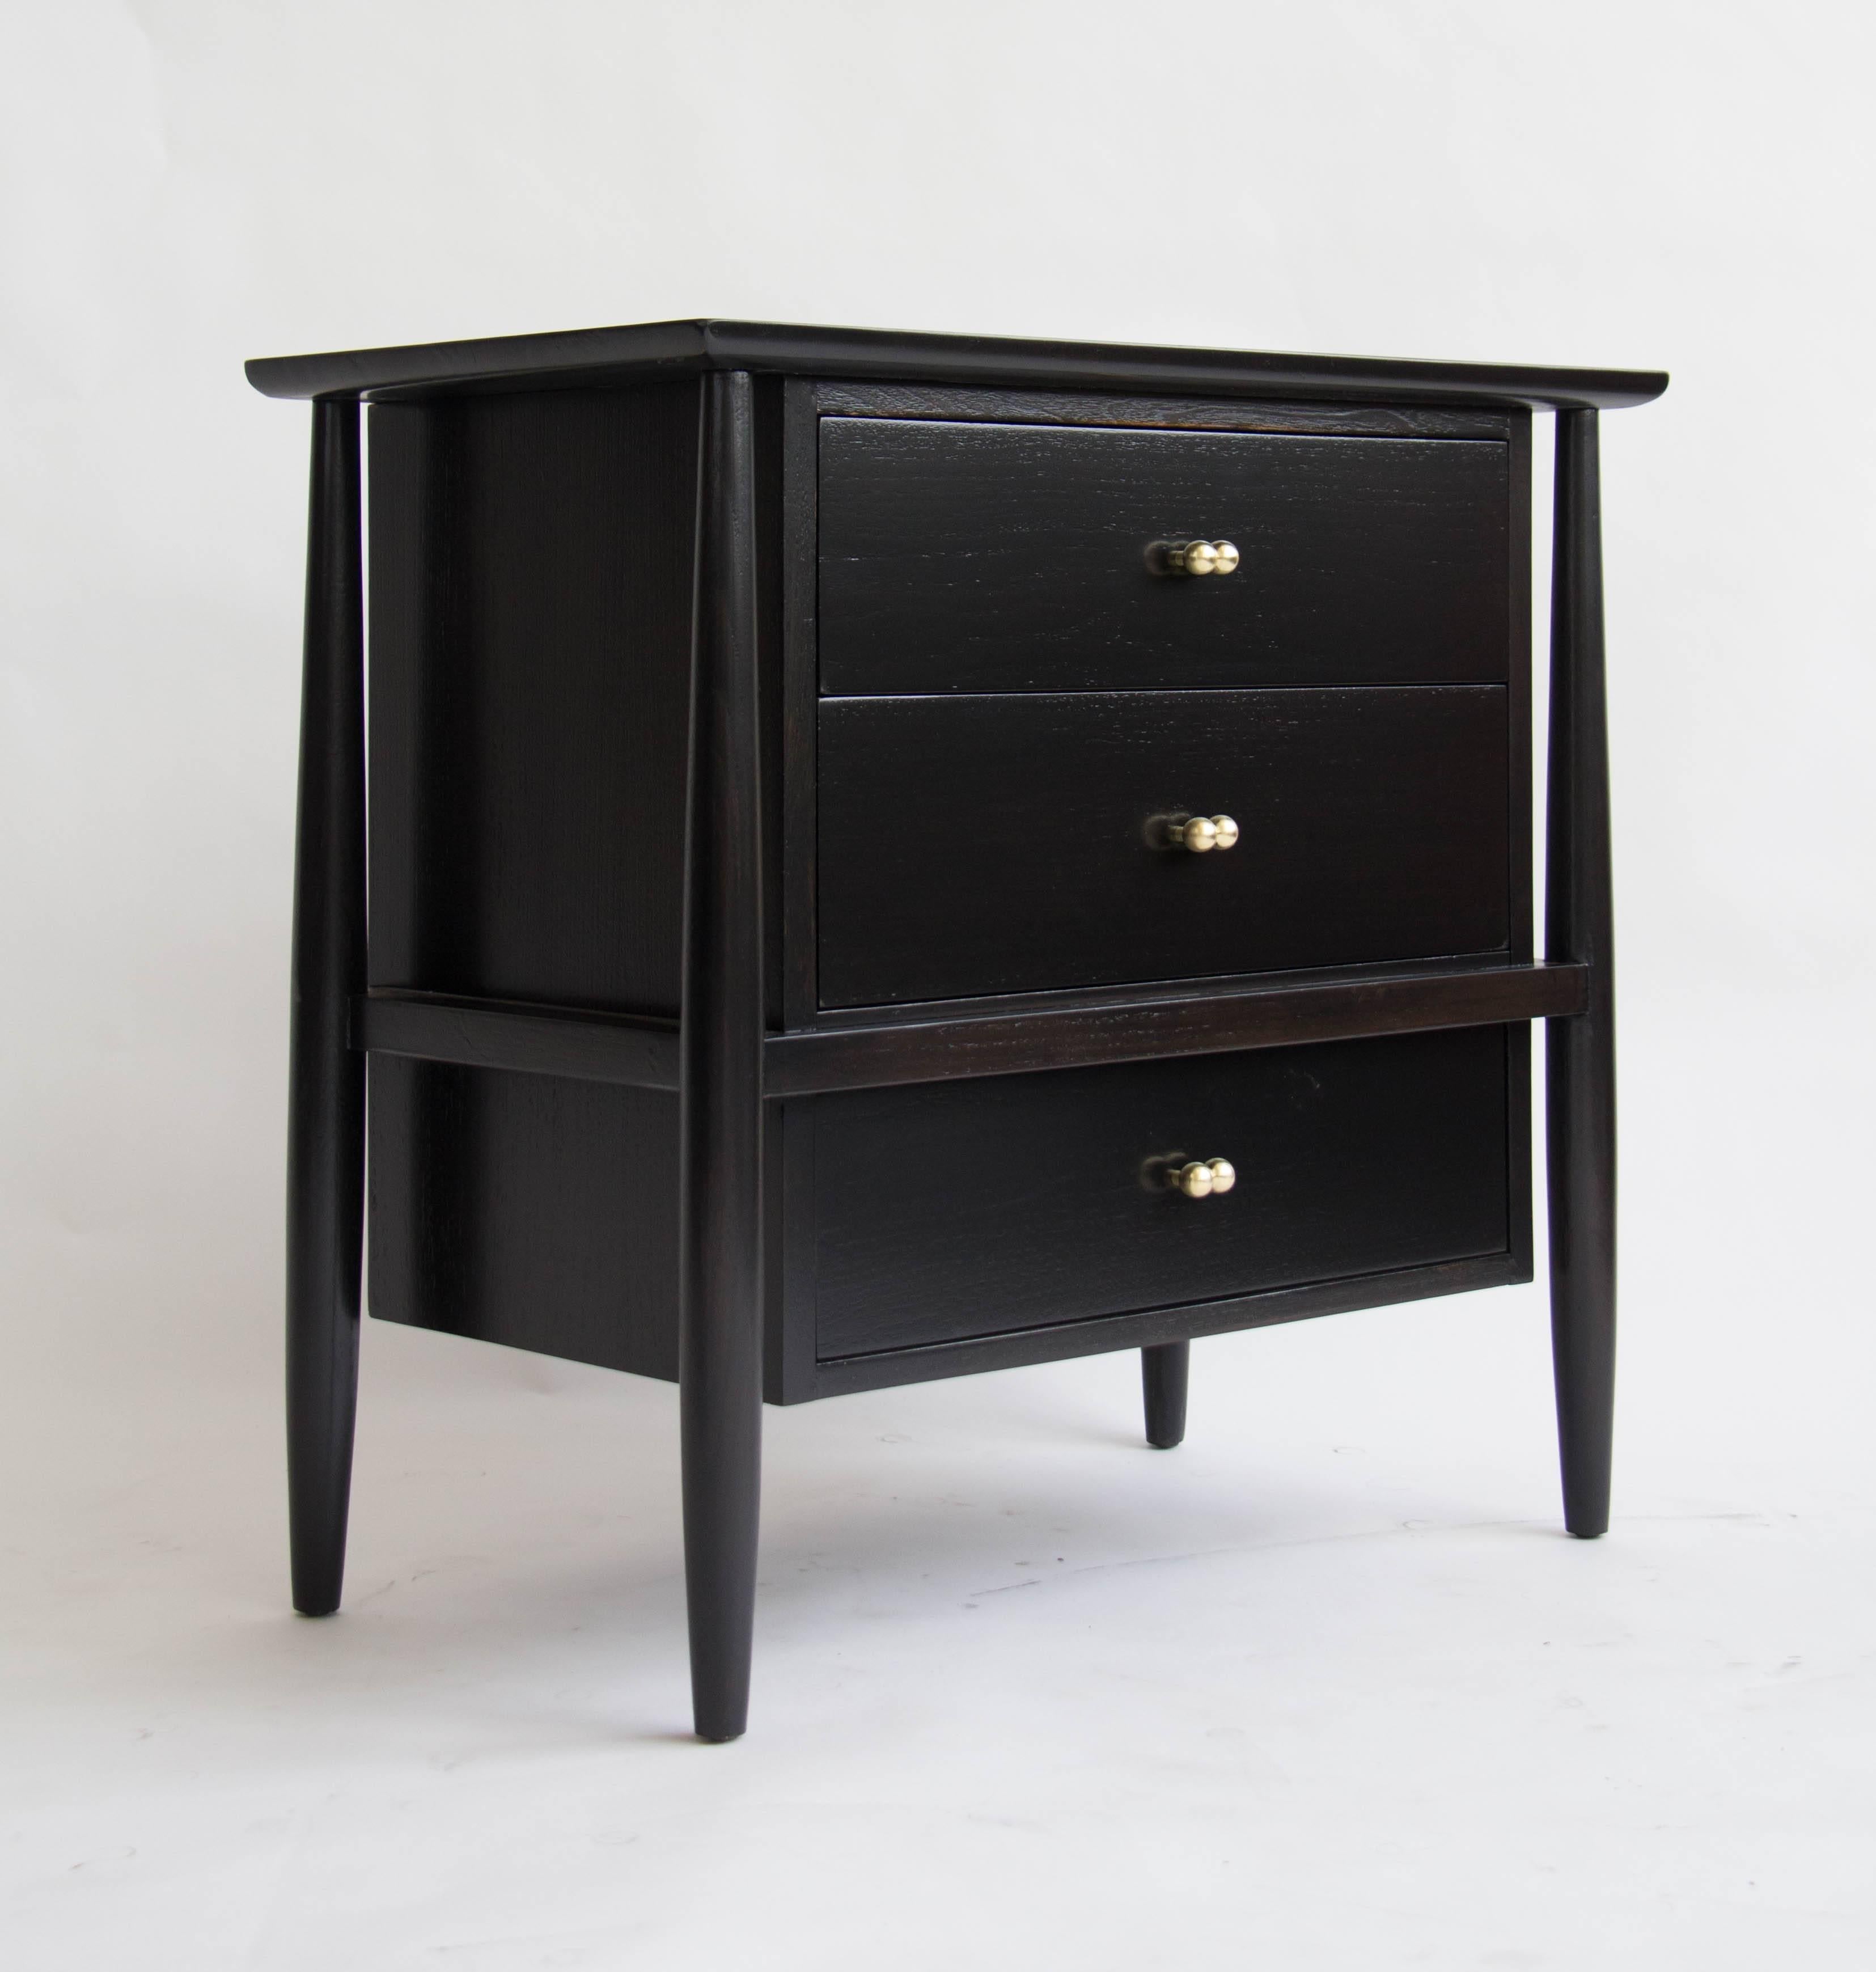 Pair of Ebonized Nightstands with Brass Details by John Stuart for Mt Airy 1